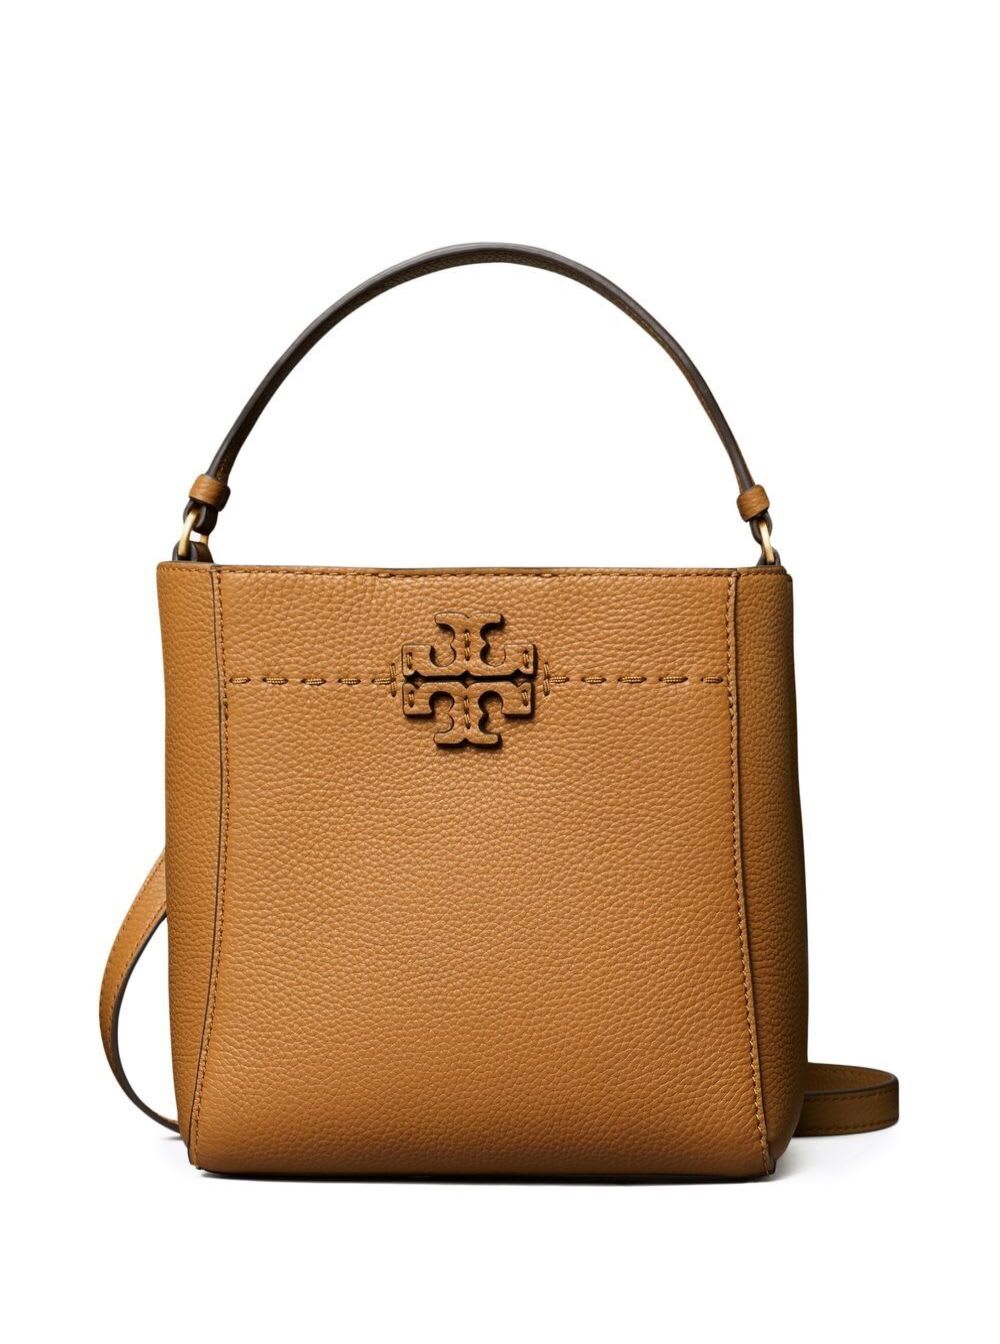 Tory Burch Beige Handbag With Tonal Logo Detail In Grainy Leather Woman